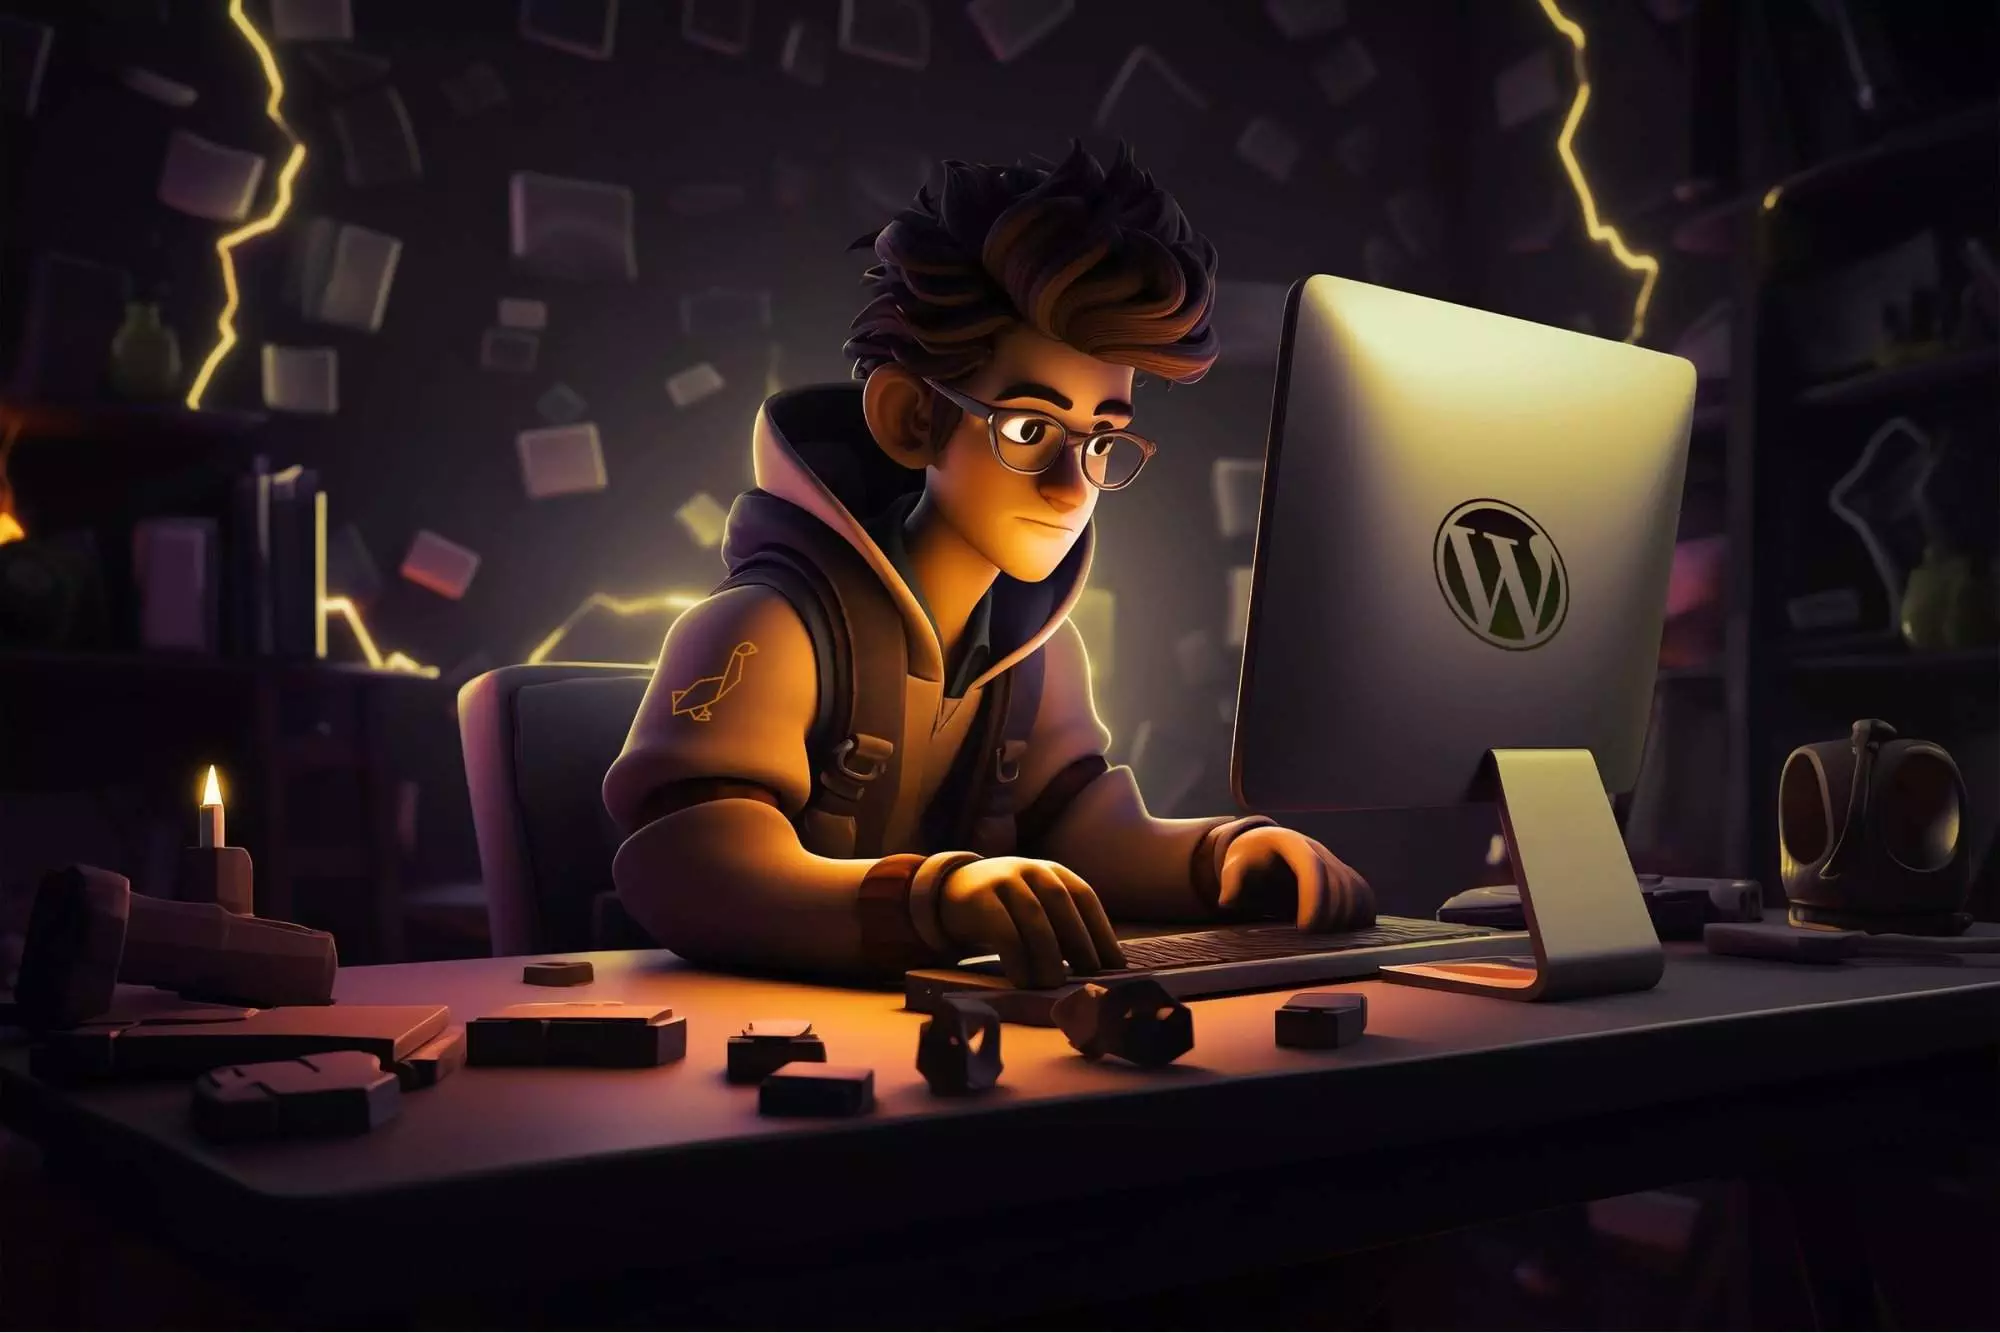 Animated developer working on a WordPress site in a dimly lit room, surrounded by floating screens.